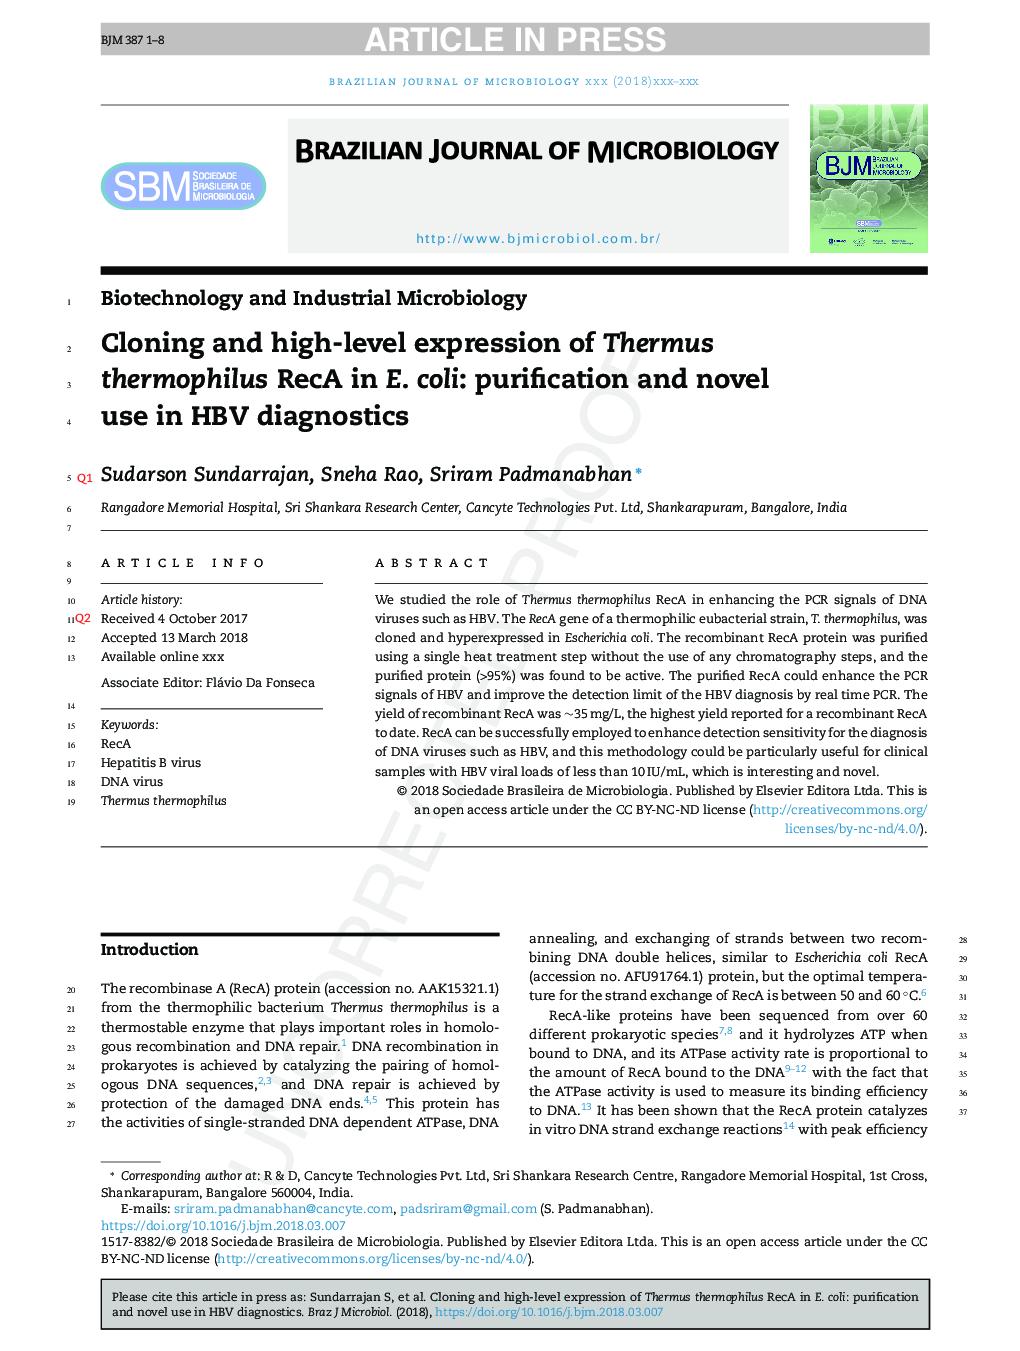 Cloning and high-level expression of Thermus thermophilus RecA in E. coli: purification and novel use in HBV diagnostics